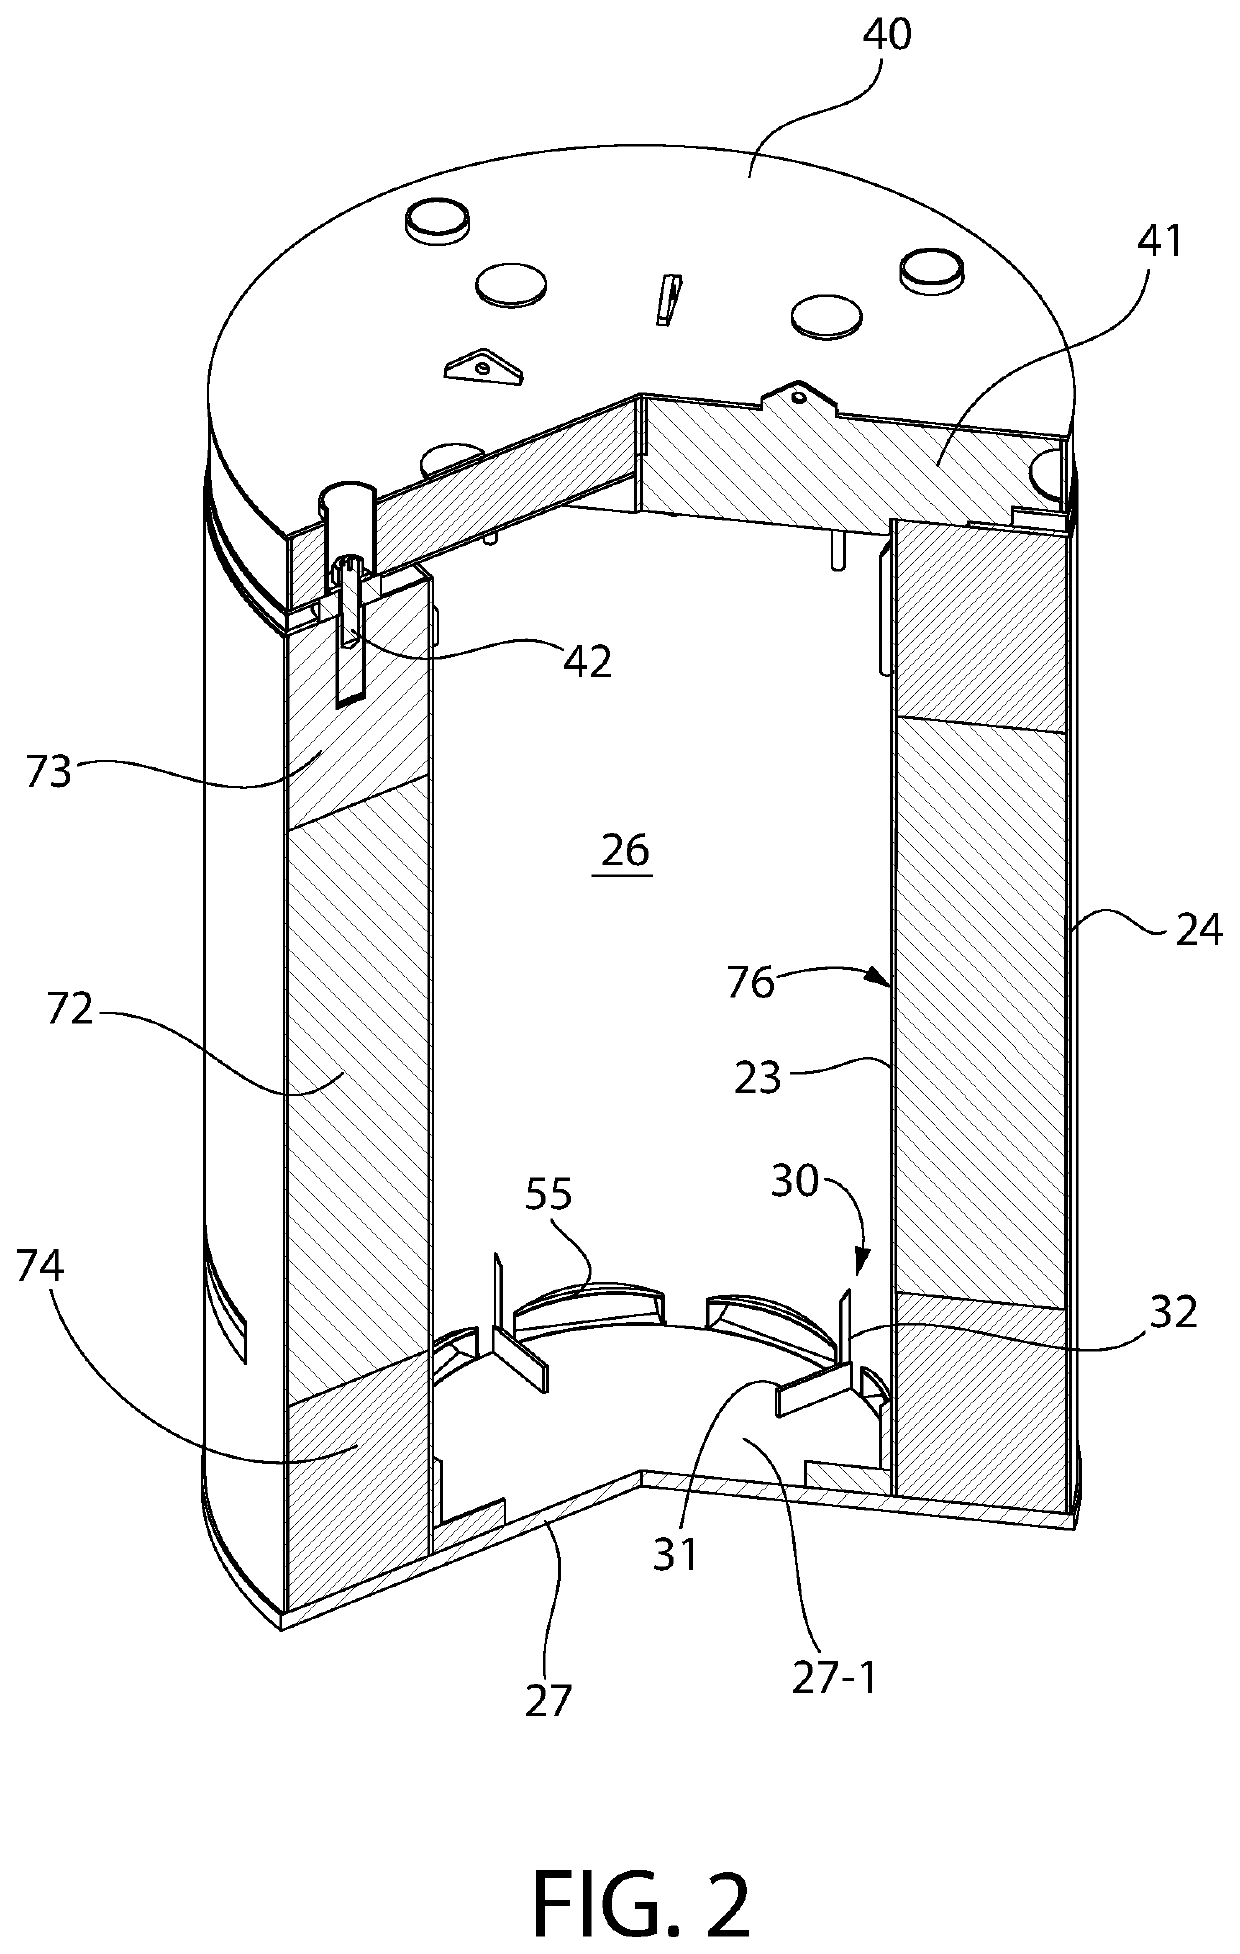 Flood and wind-resistant ventilated module for spent nuclear fuel storage